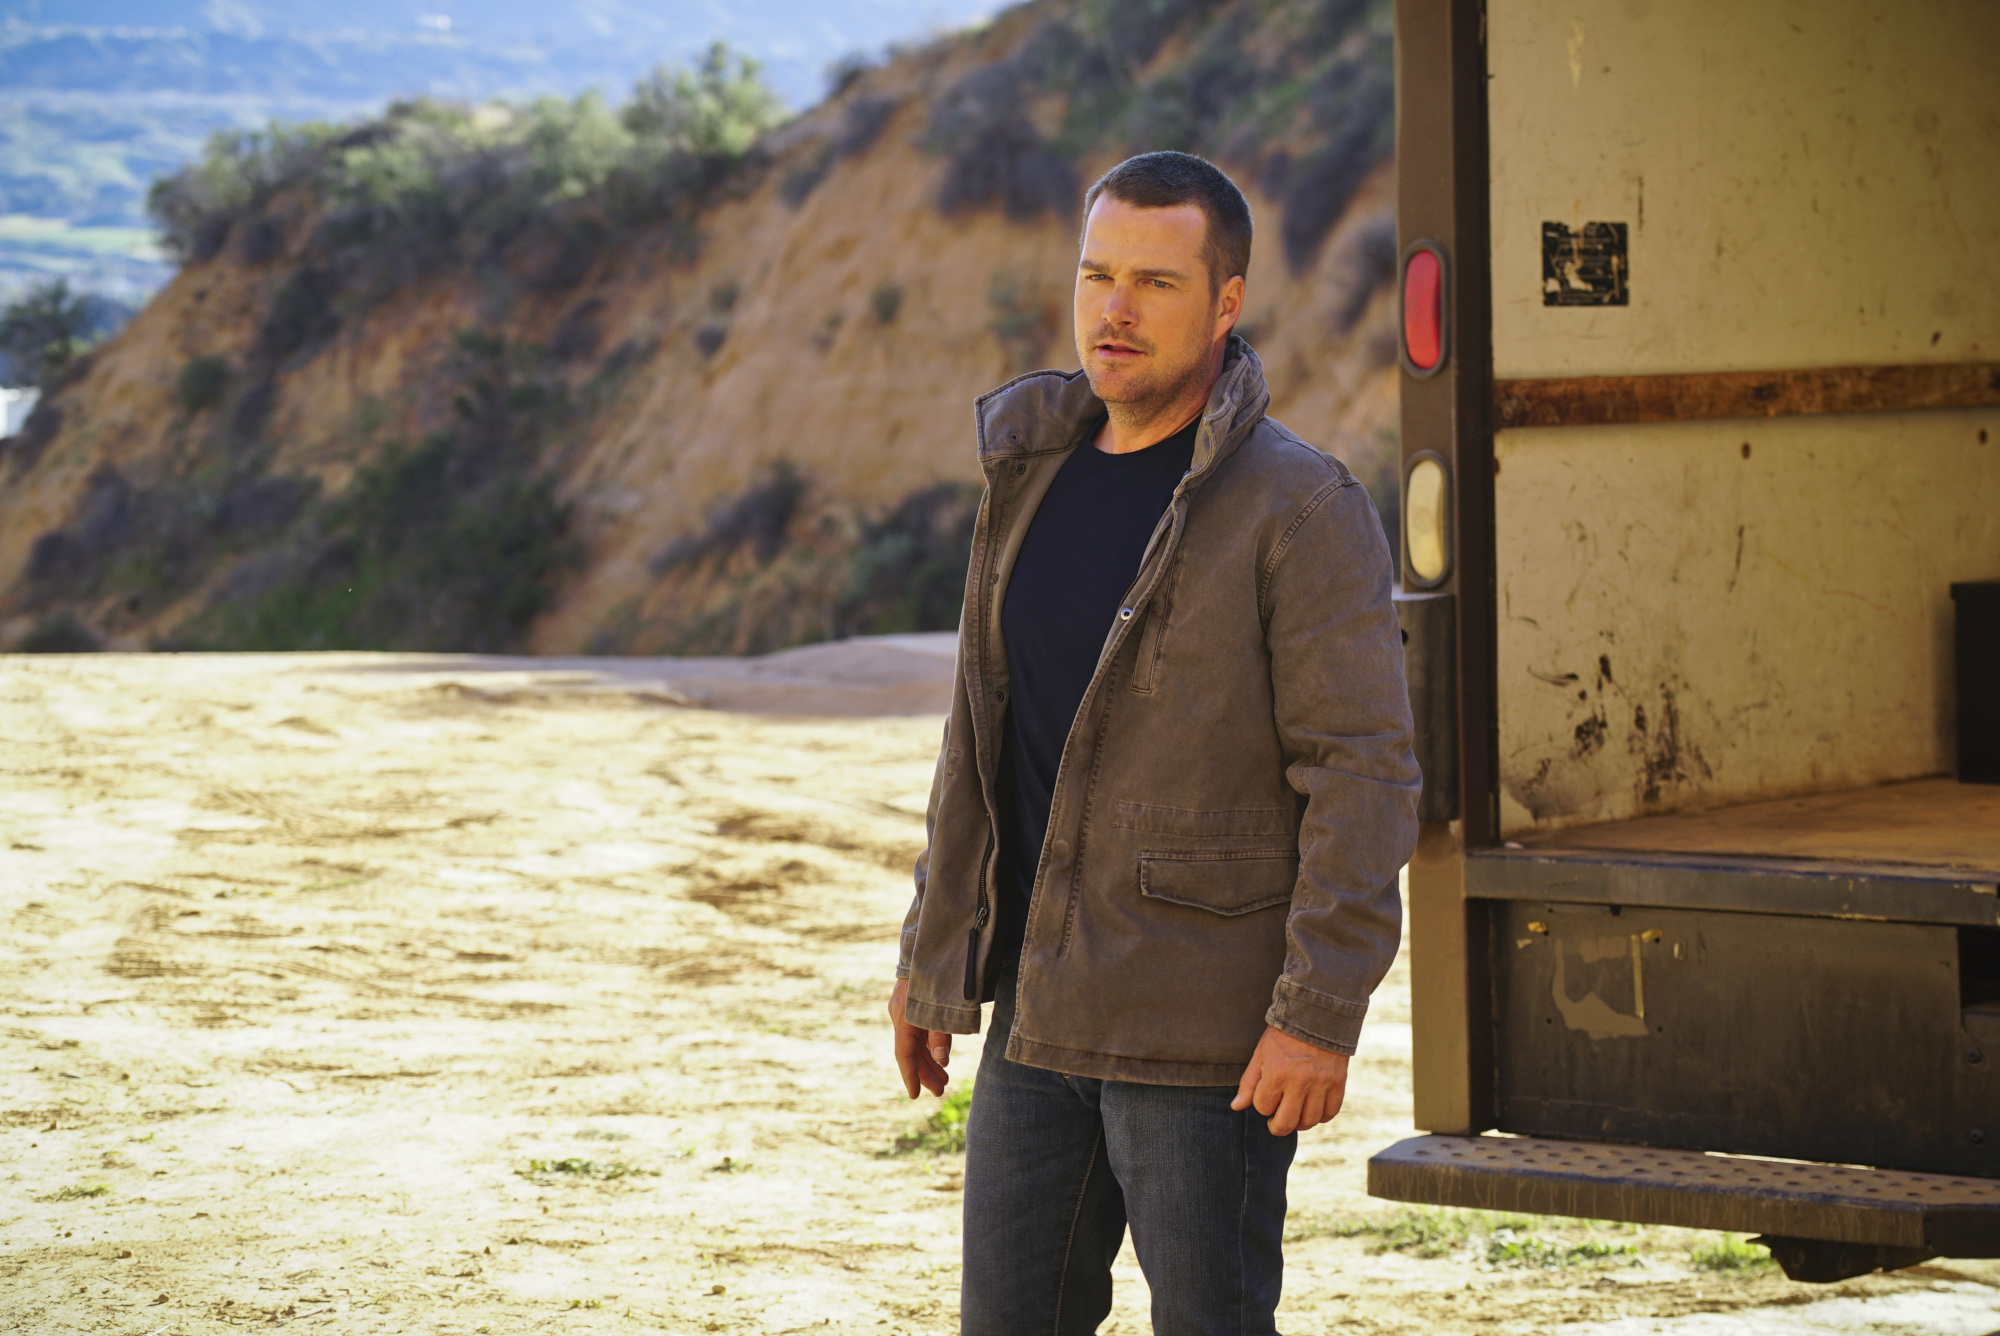 Chris O'Donnell as Special Agent G. Callen